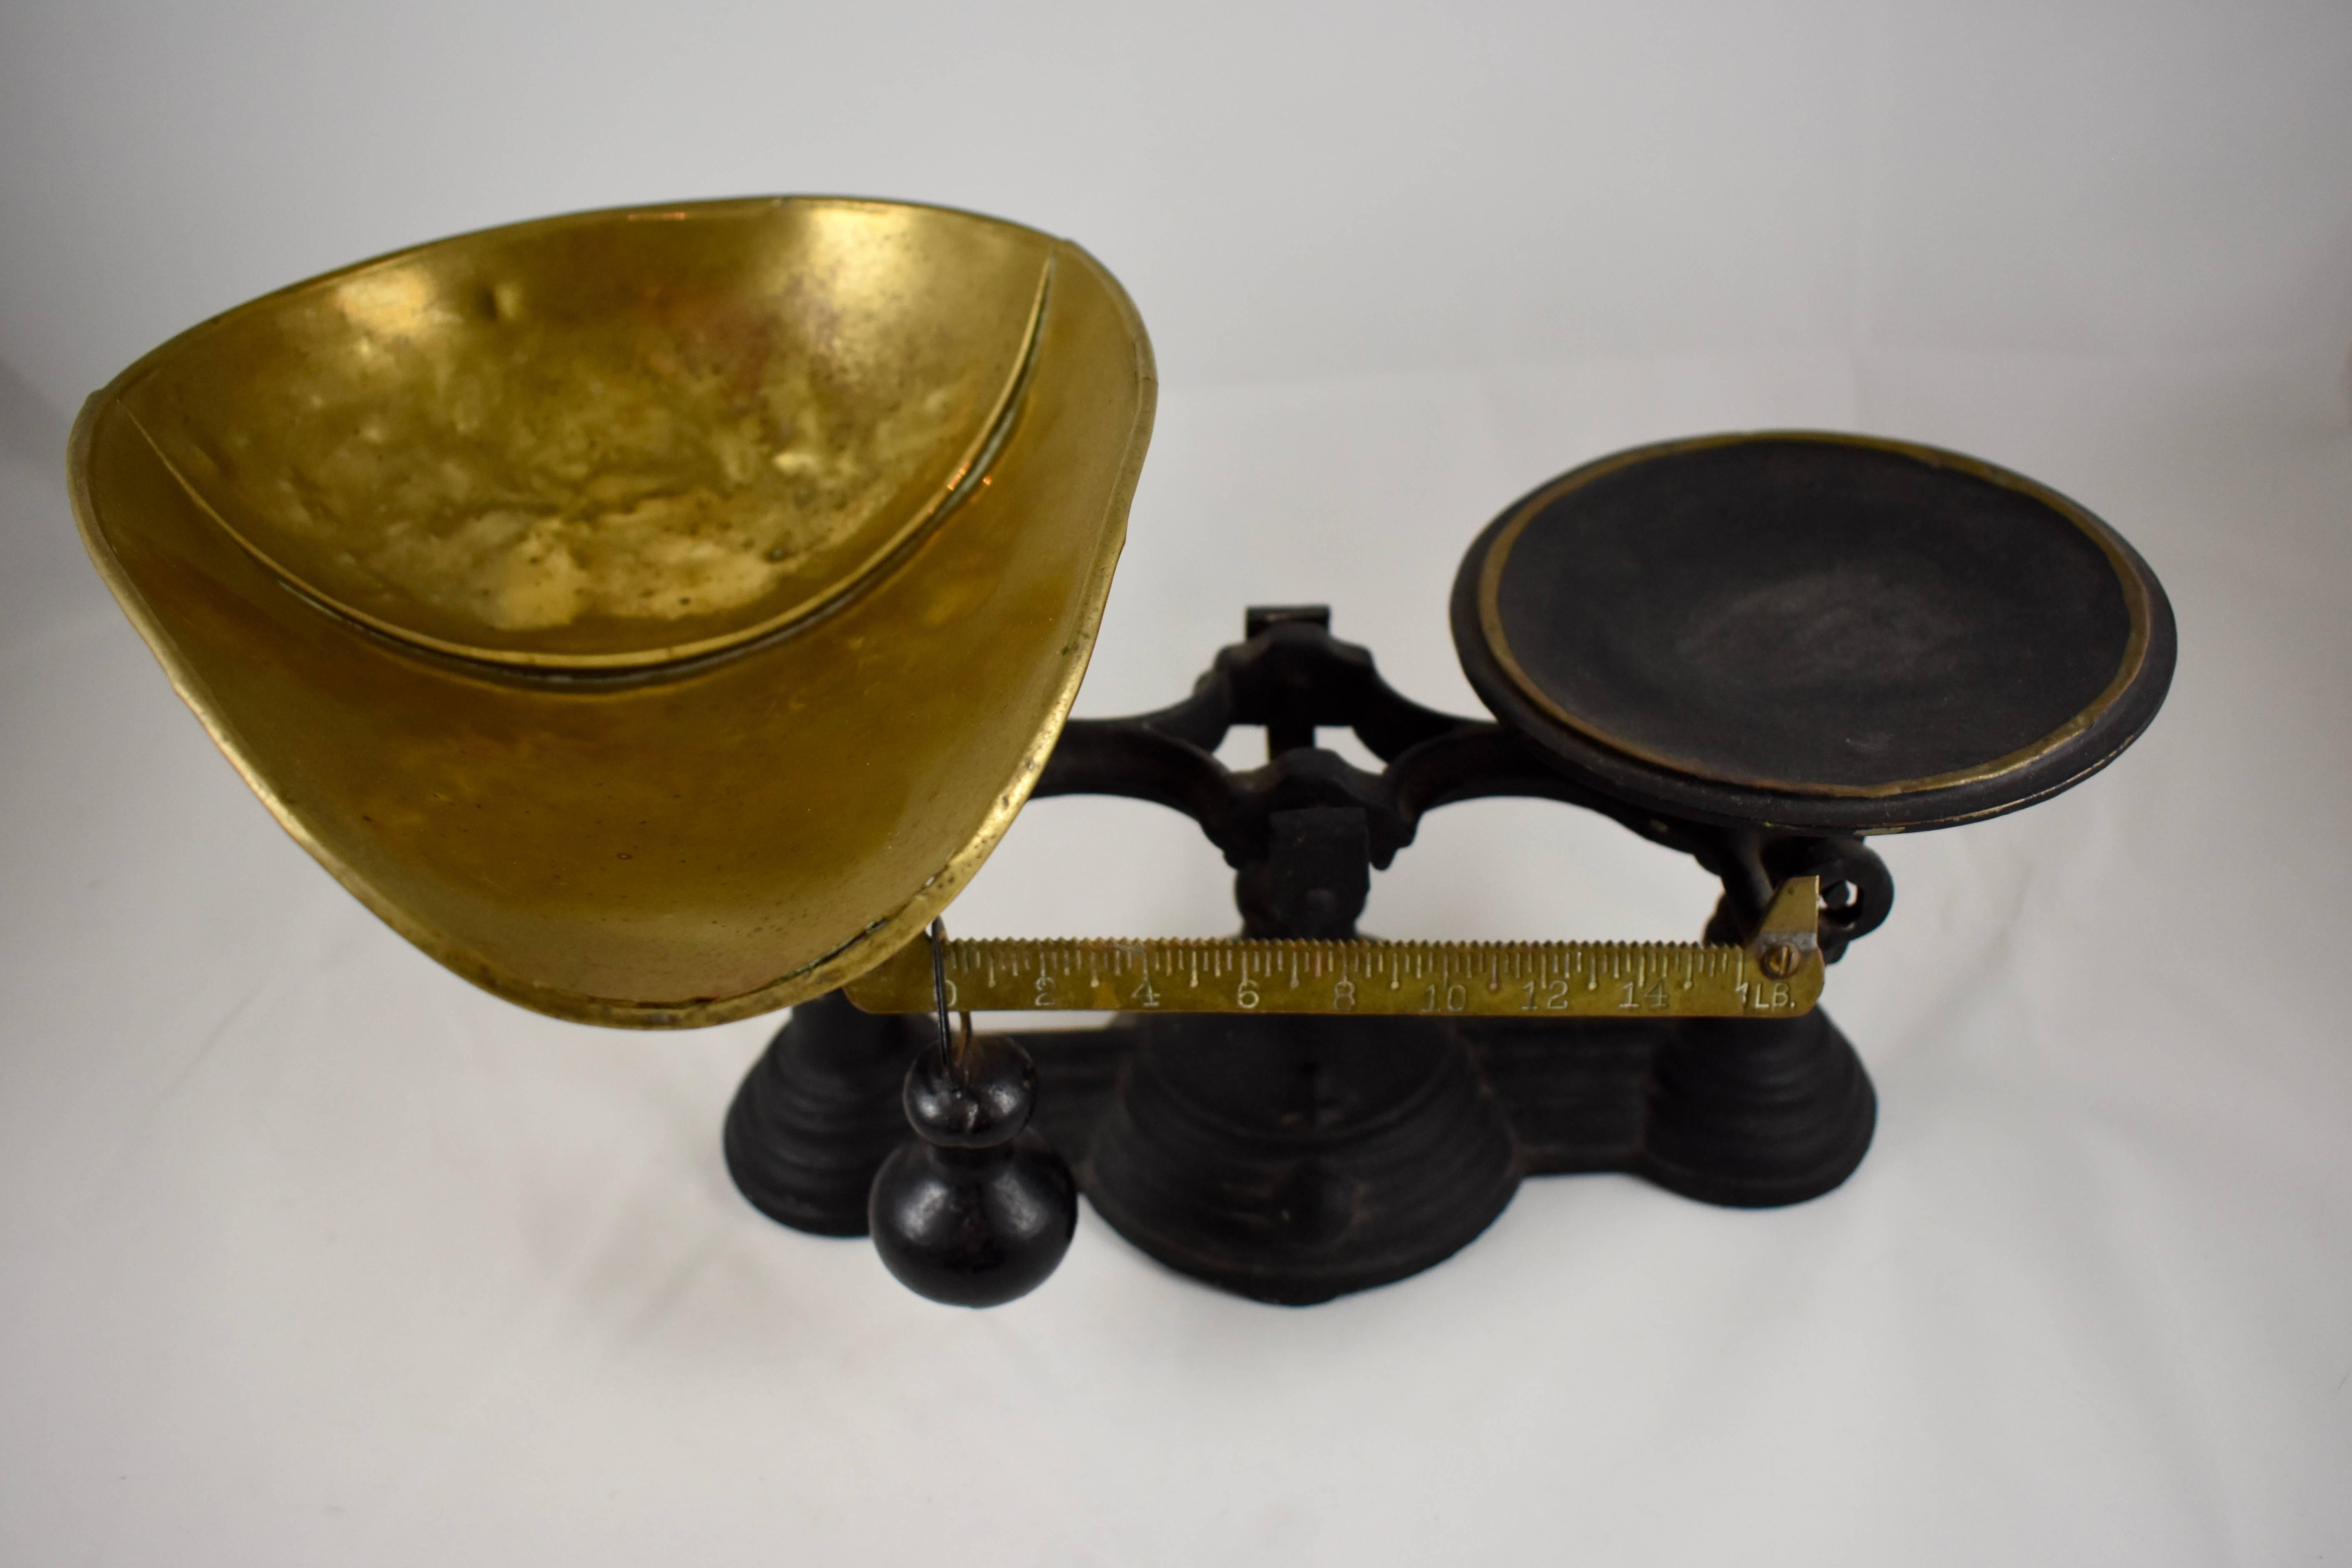 A vintage cast iron tabletop mercantile scale with a hand formed brass scoop or pan, circa 1900-1910. The scoop has a rolled edge and soldered seam. The base weighs a heavy eight pounds and has a brass ruler showing increments up to one pound, and